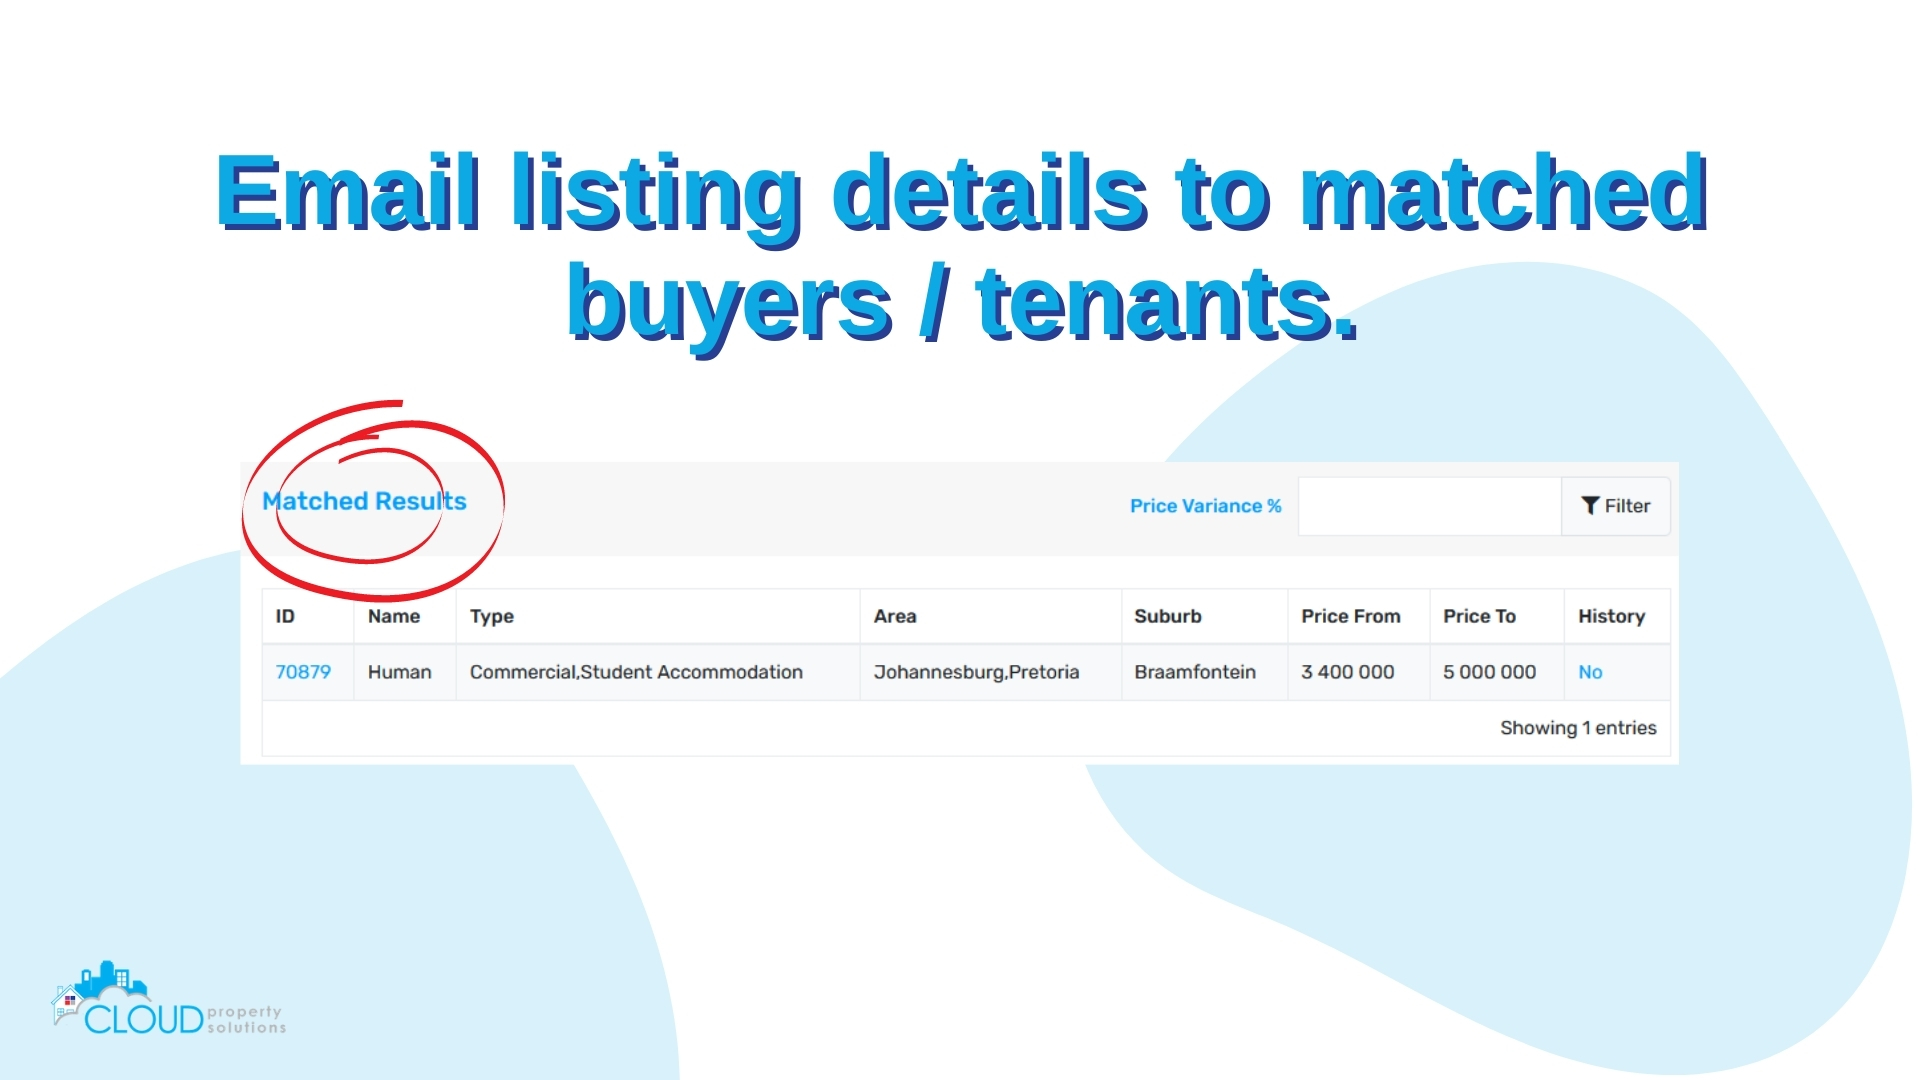 Email property brochures or links to matched buyers or tenants